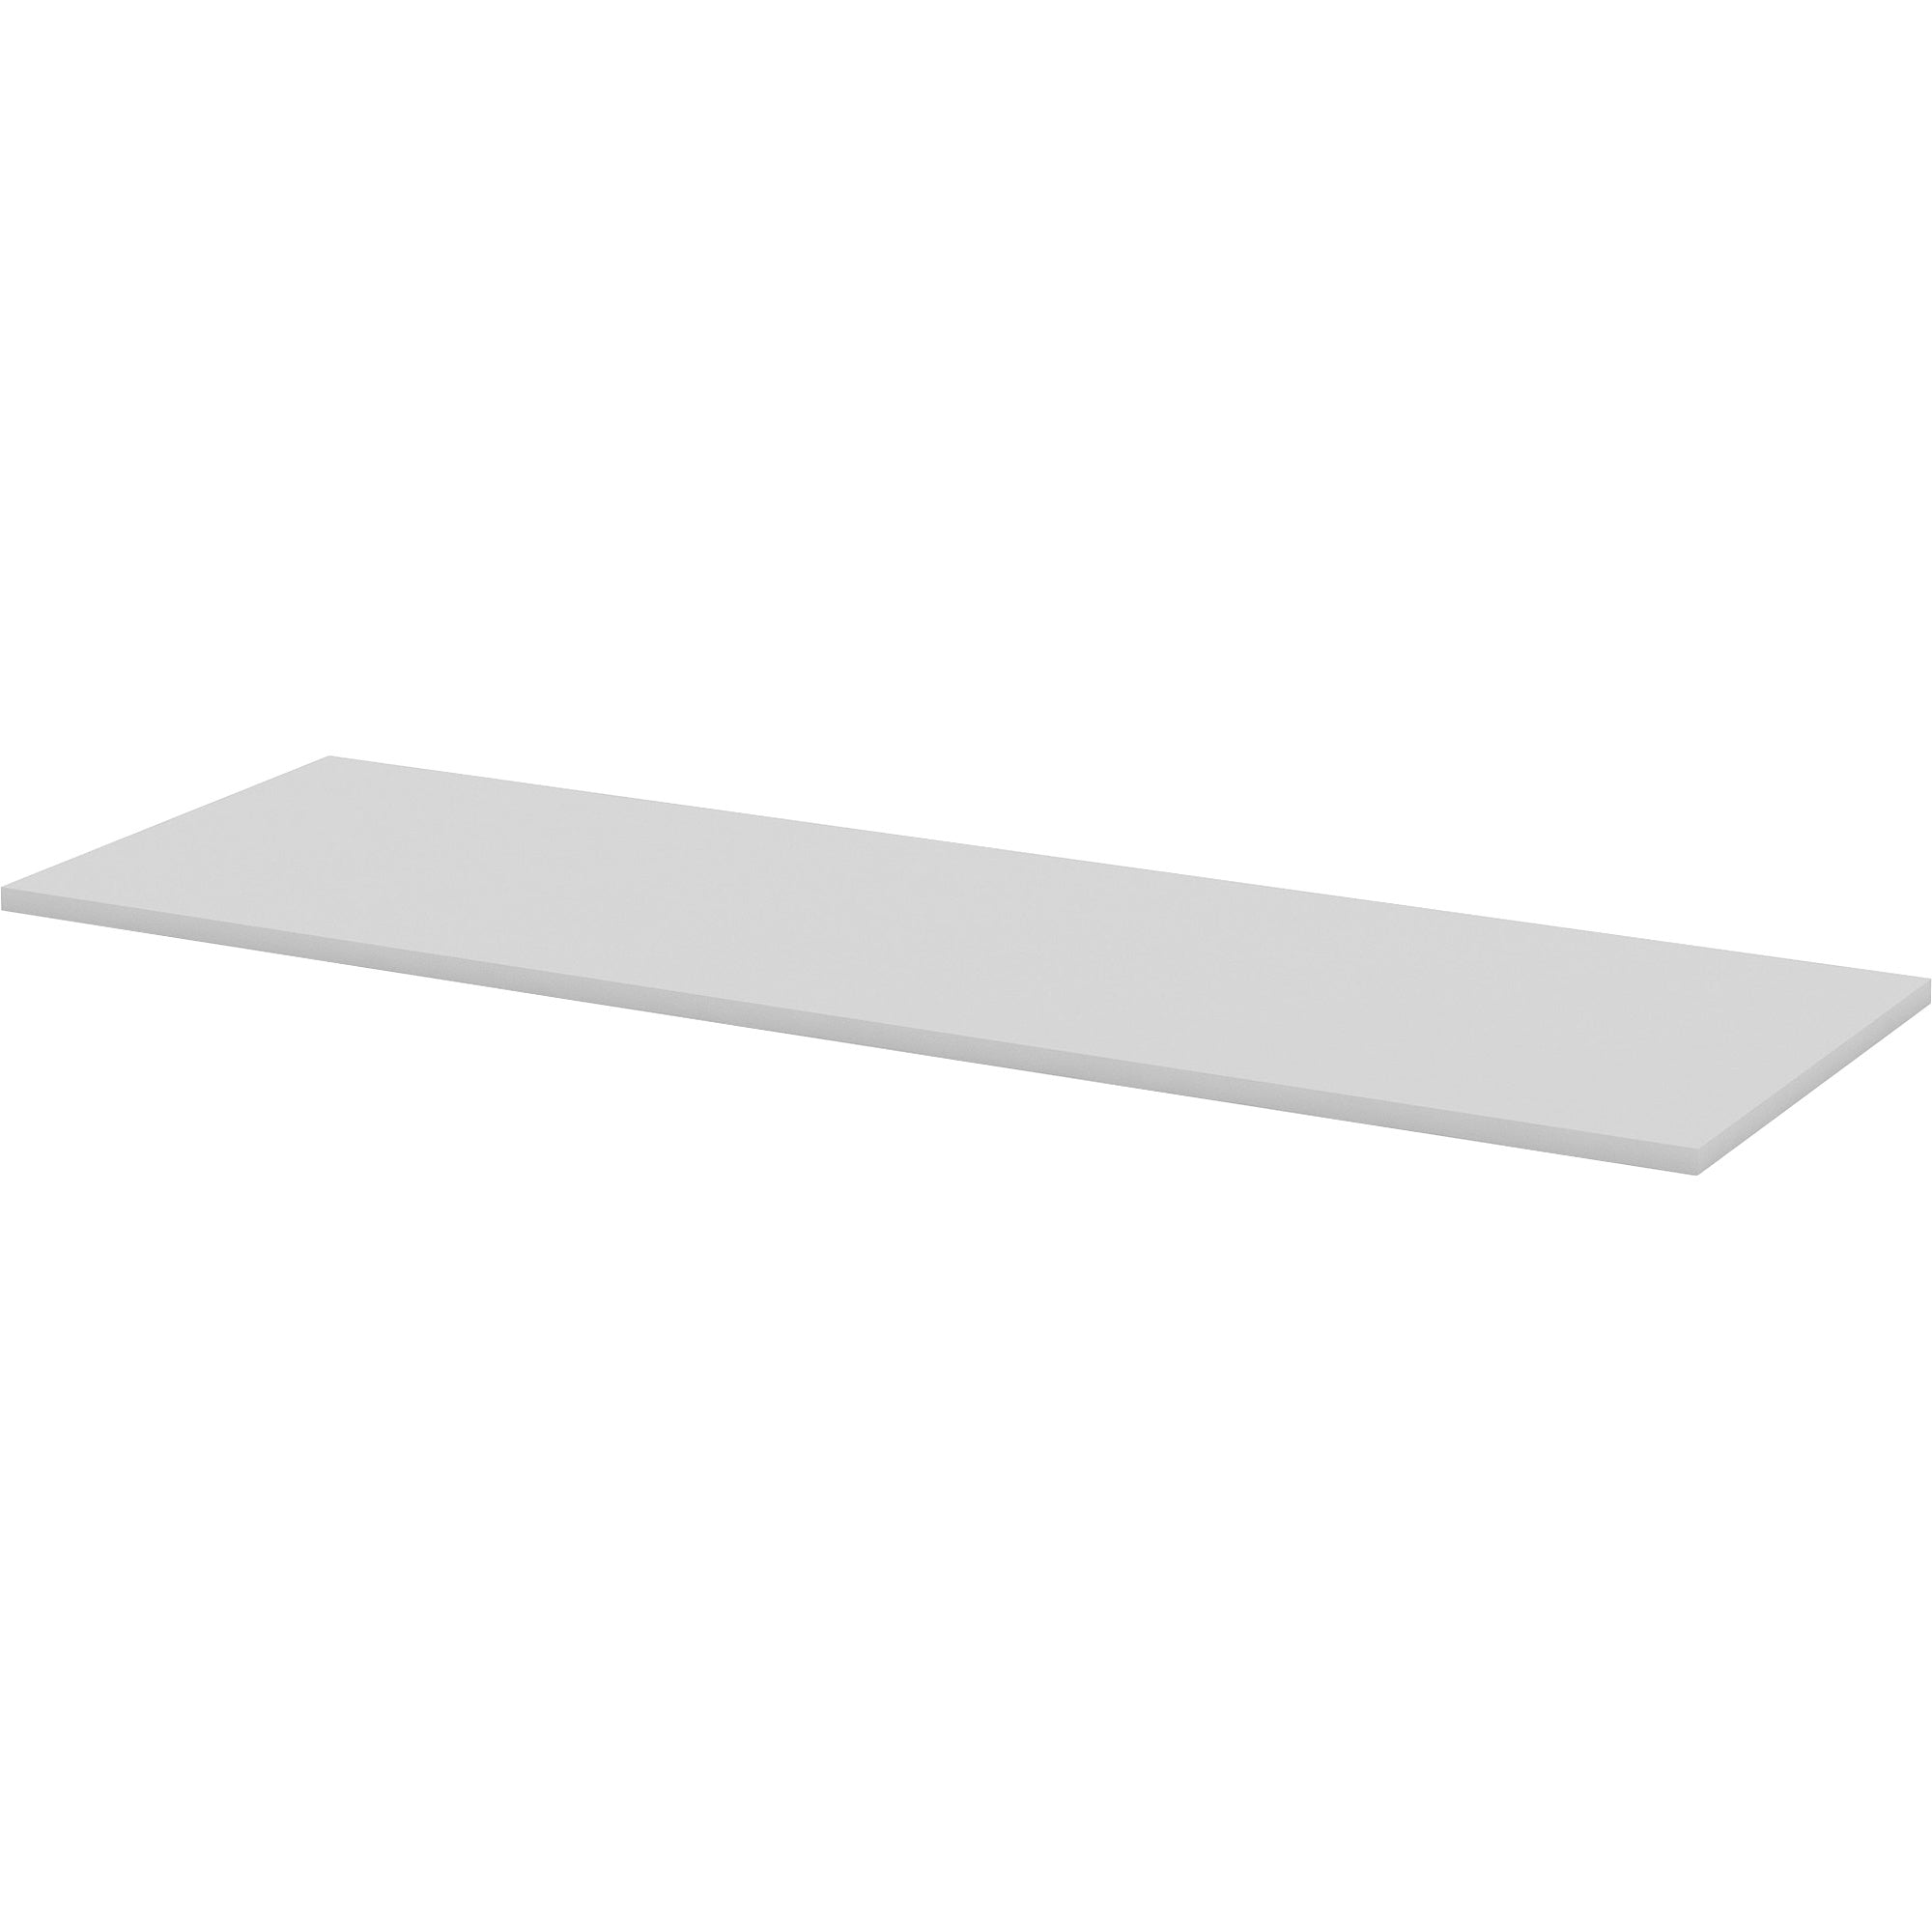 lorell-training-tabletop-for-table-topgray-rectangle-top-72-table-top-length-x-24-table-top-width-x-1-table-top-thickness-assembly-required-1-each_llr62598 - 1